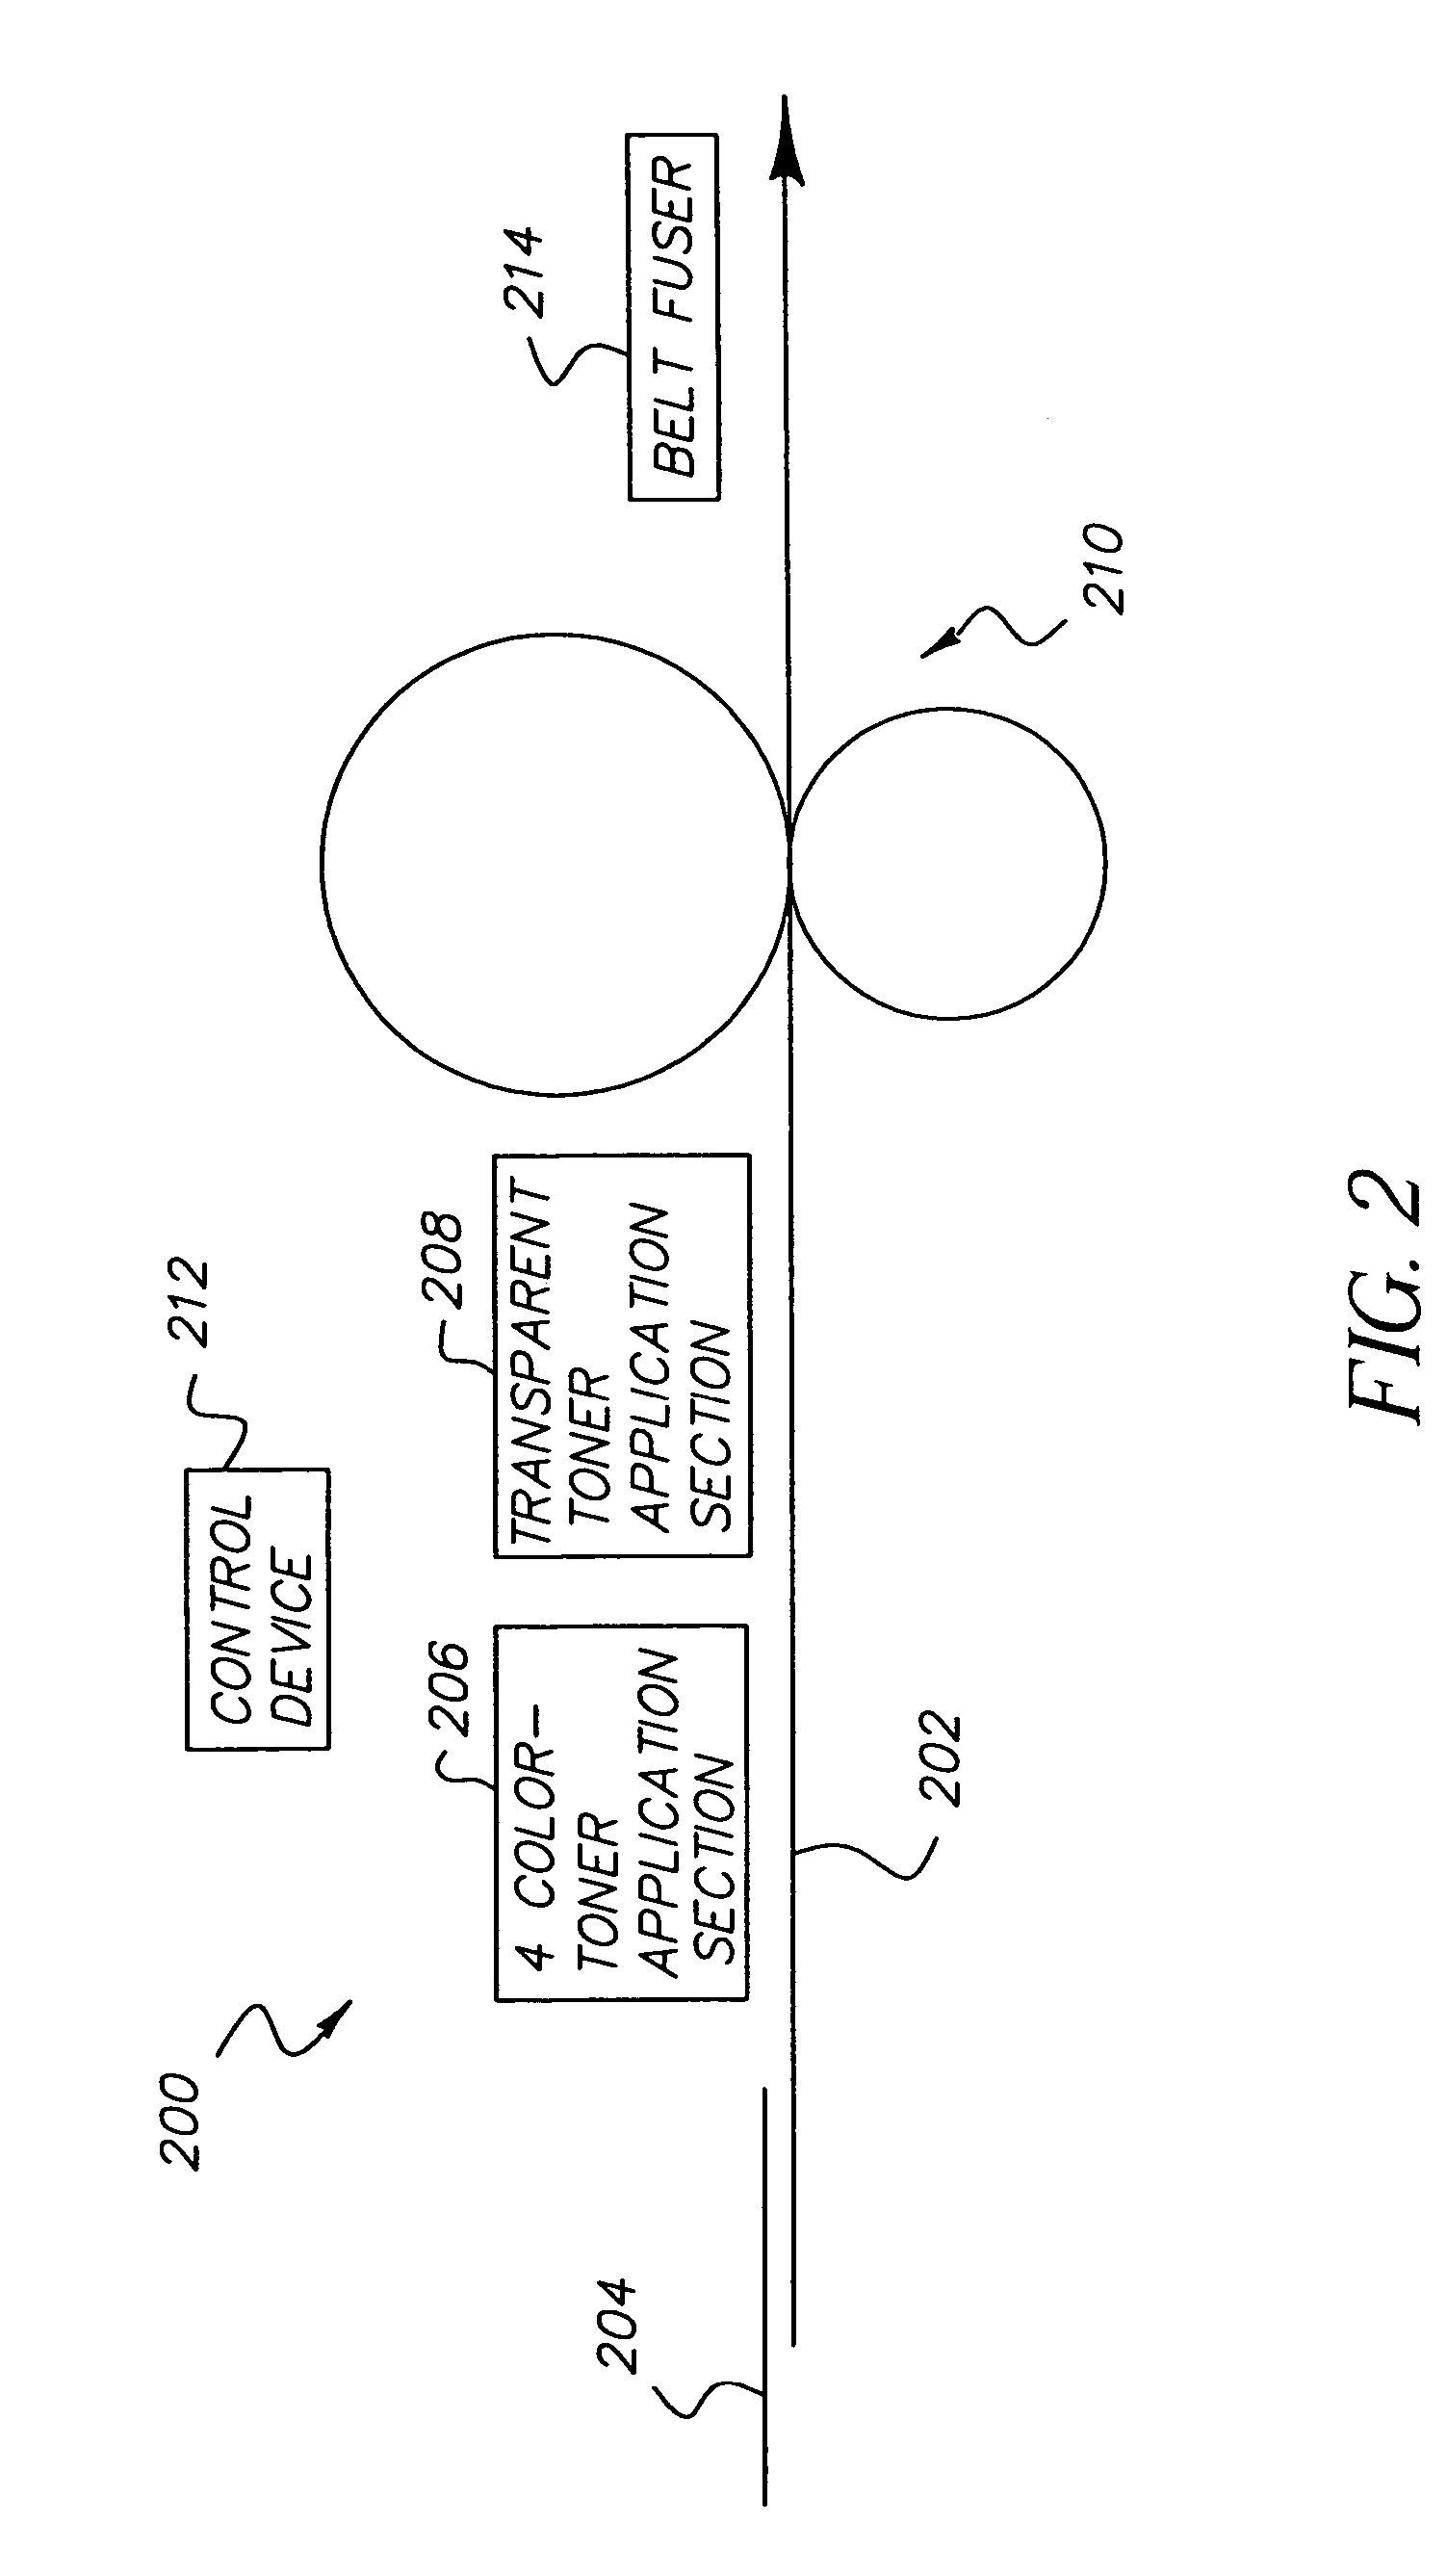 Adjustable gloss control method with different substrates and 3-D image effect with adjustable gloss